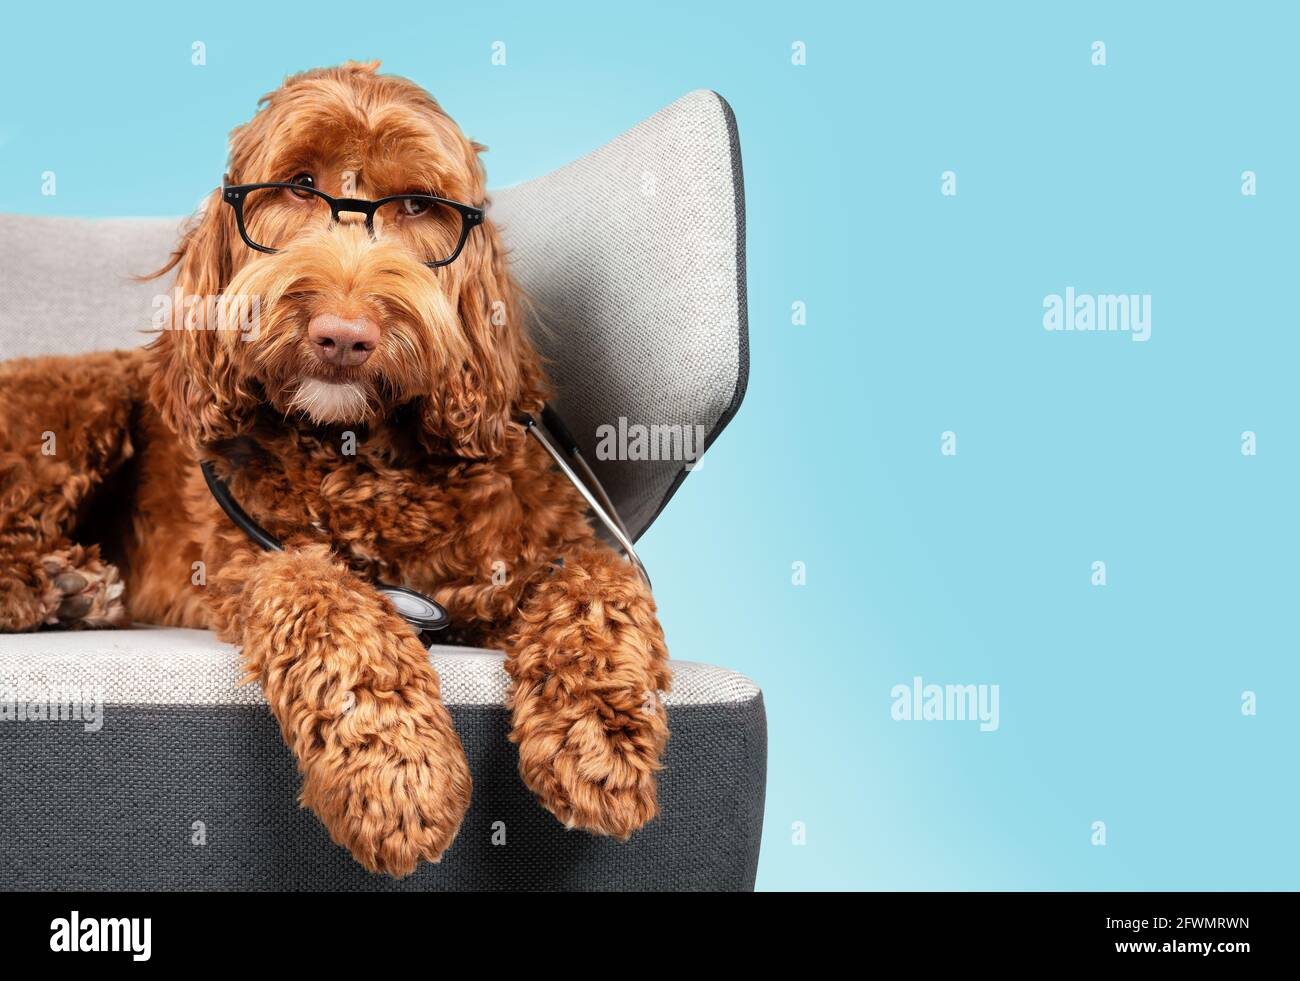 Labradoodle dog with glasses and stethoscope on sofa chair with blue color background. Cute fluffy dog with tilted head and listening expression. Pet Stock Photo